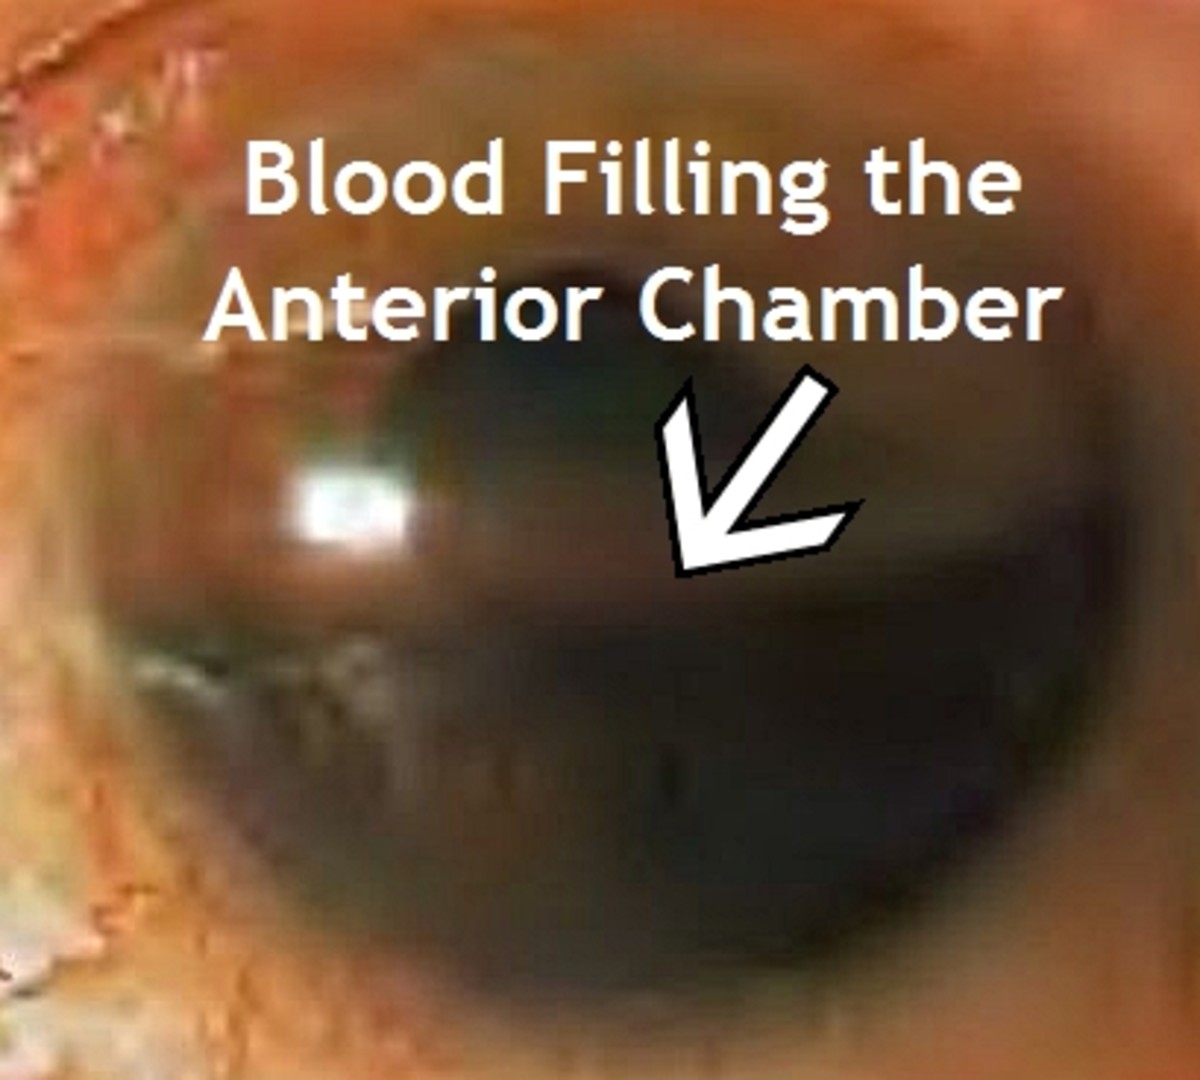 Hyphema, or blood in the lower half of the anterior chamber caused by a traumatic eye injury.